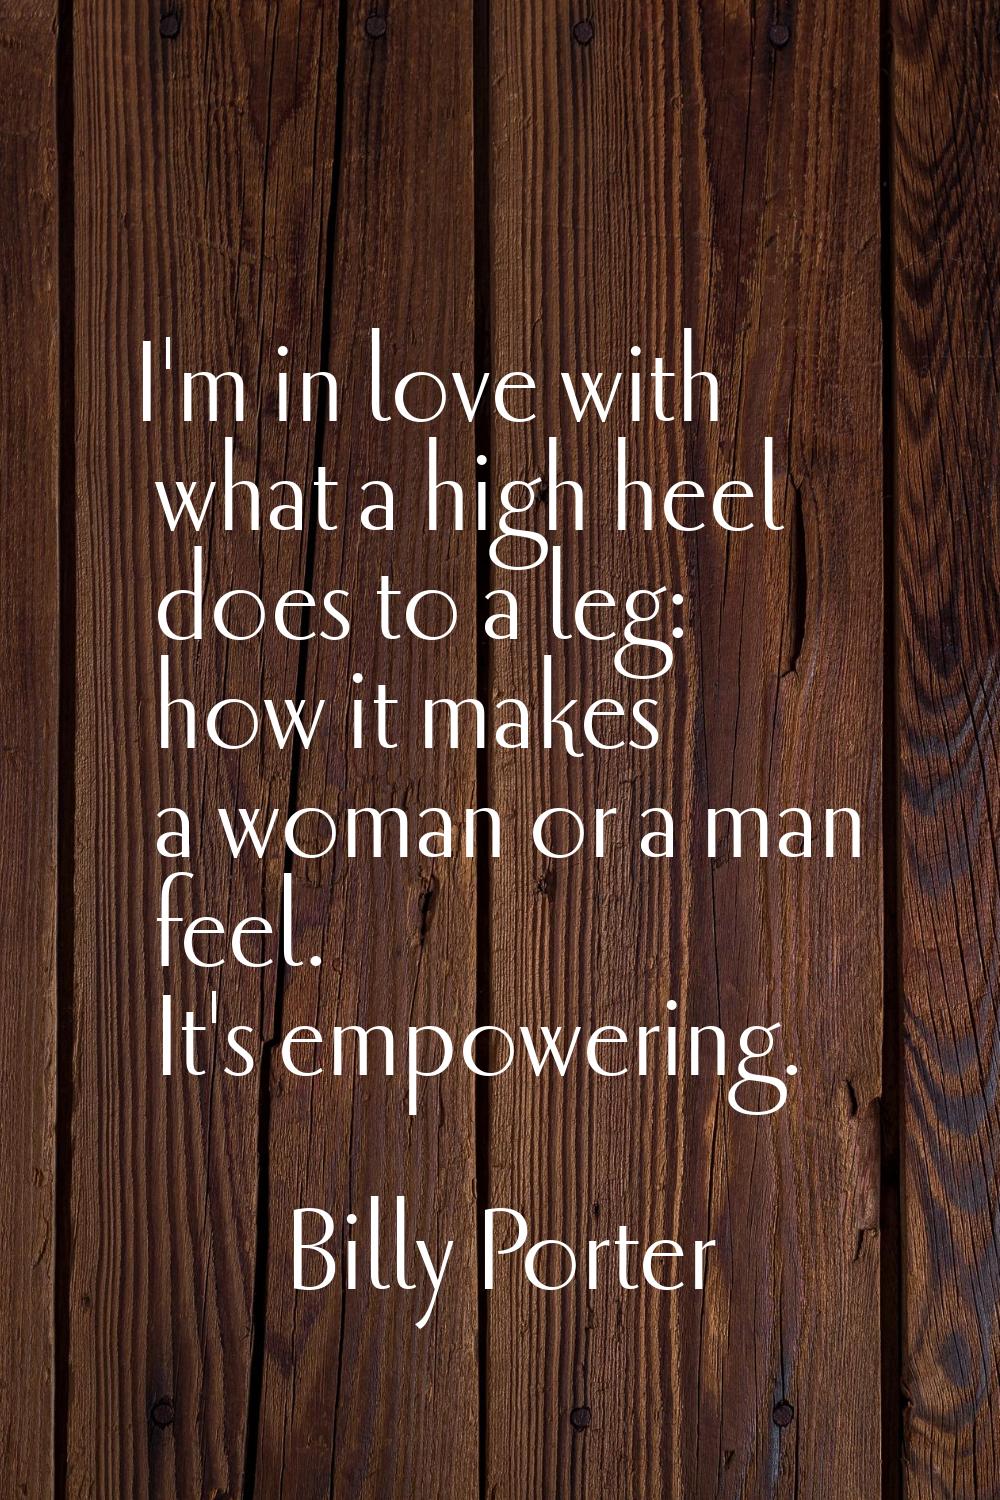 I'm in love with what a high heel does to a leg: how it makes a woman or a man feel. It's empowerin